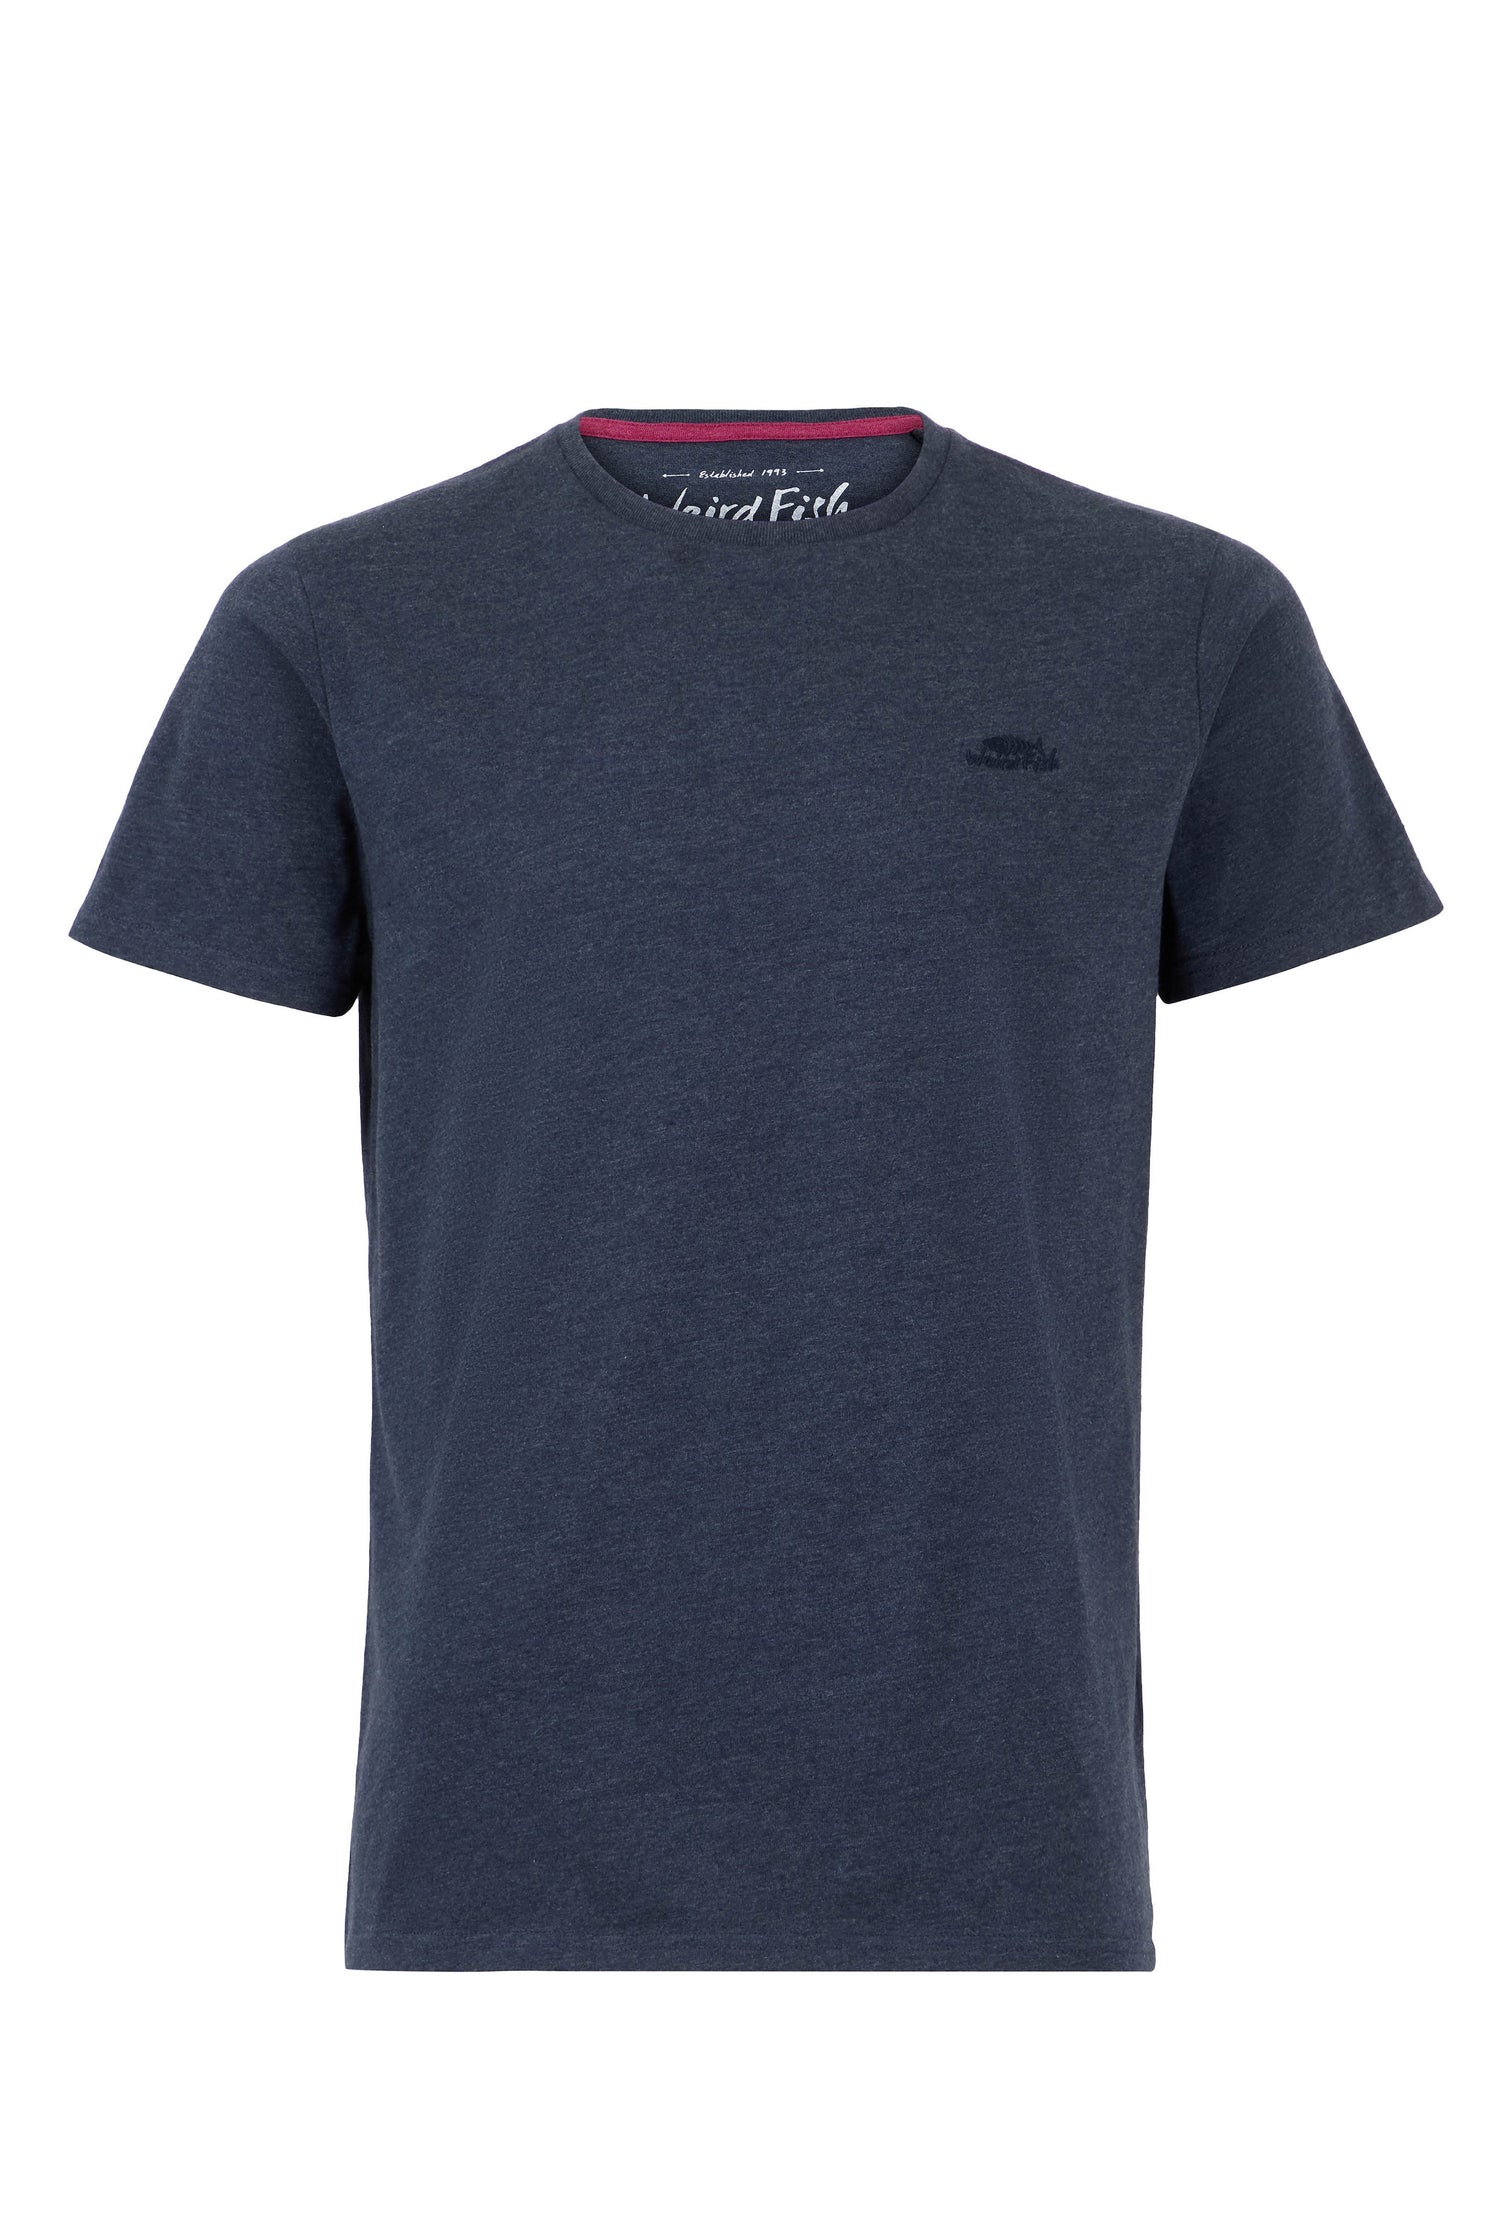 Fished Eco Branded Tee - Navy